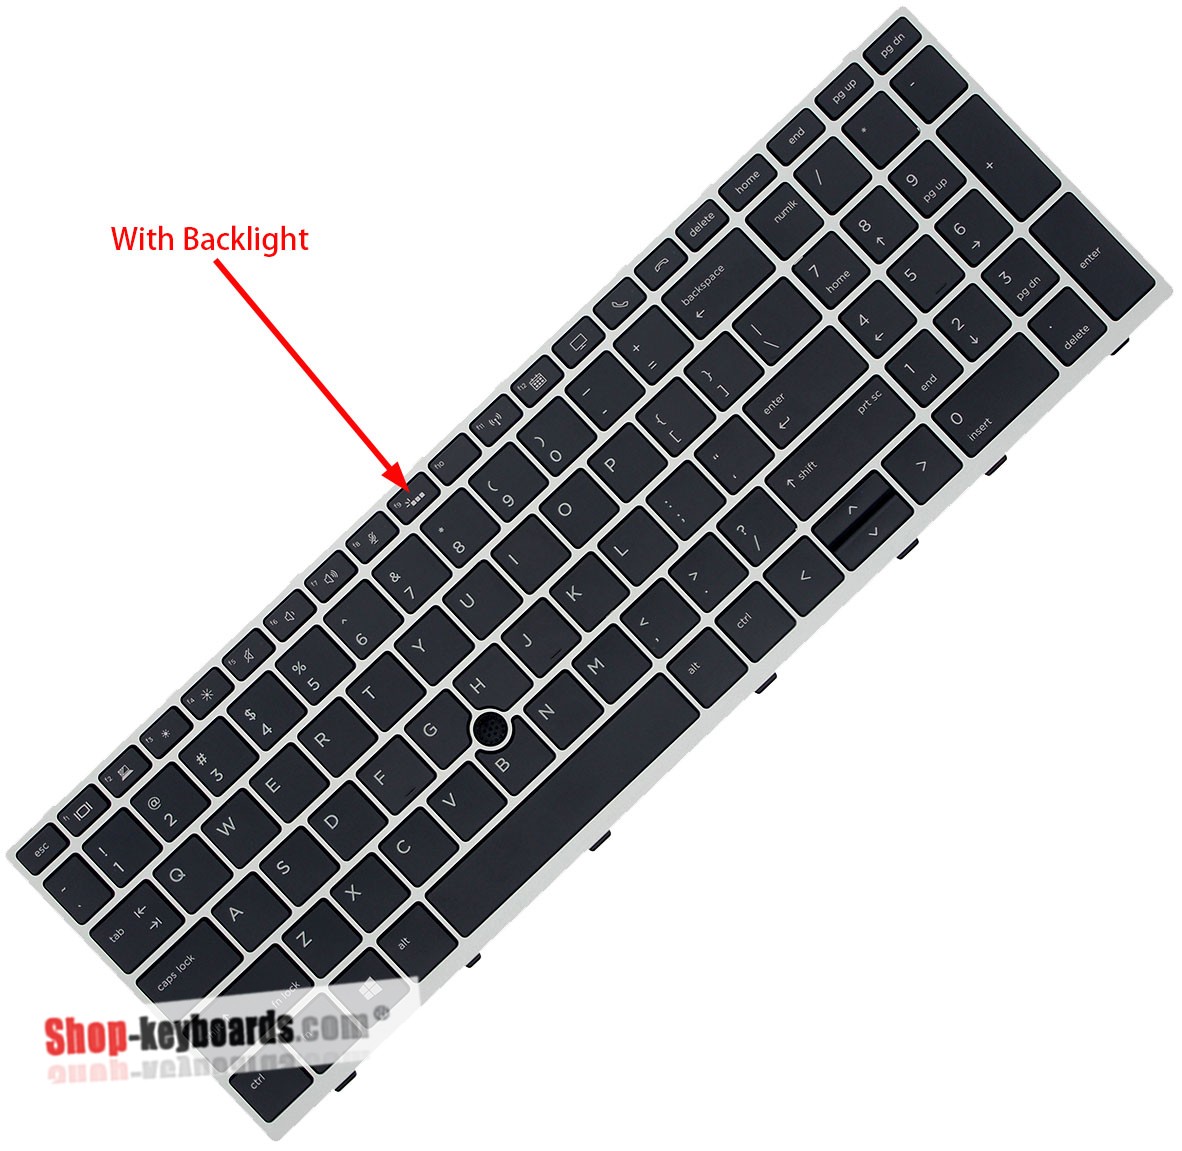 HP HMP17G26GB69301 Keyboard replacement